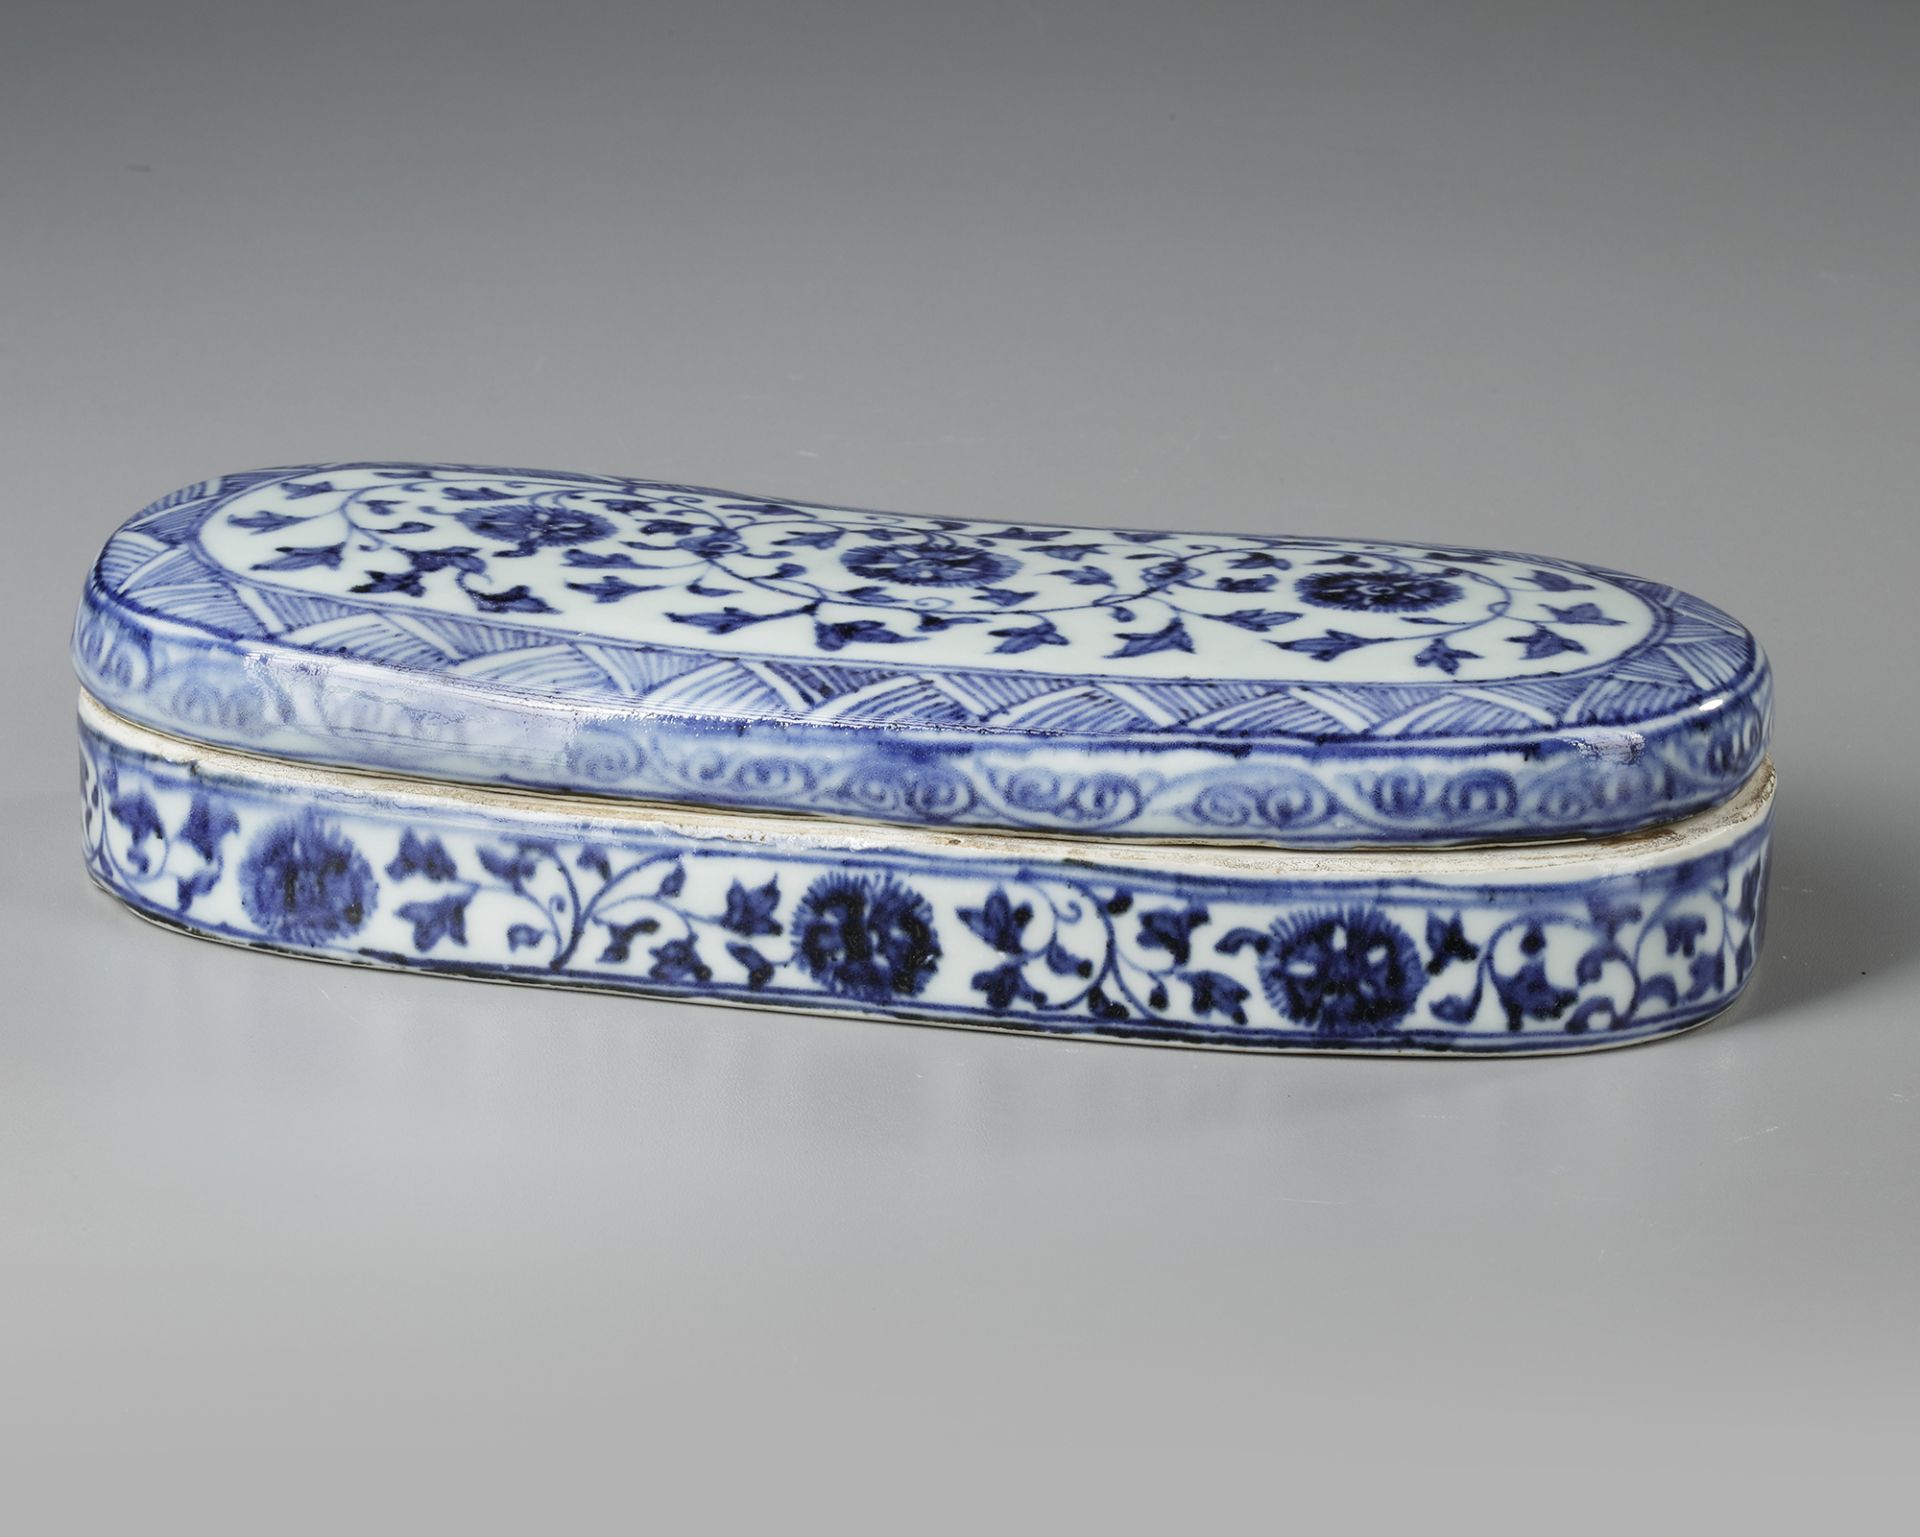 A CHINESE BLUE AND WHITE PEN BOX FOR THE ISLAMIC MARKET, QING DYNASTY (1644-1911)